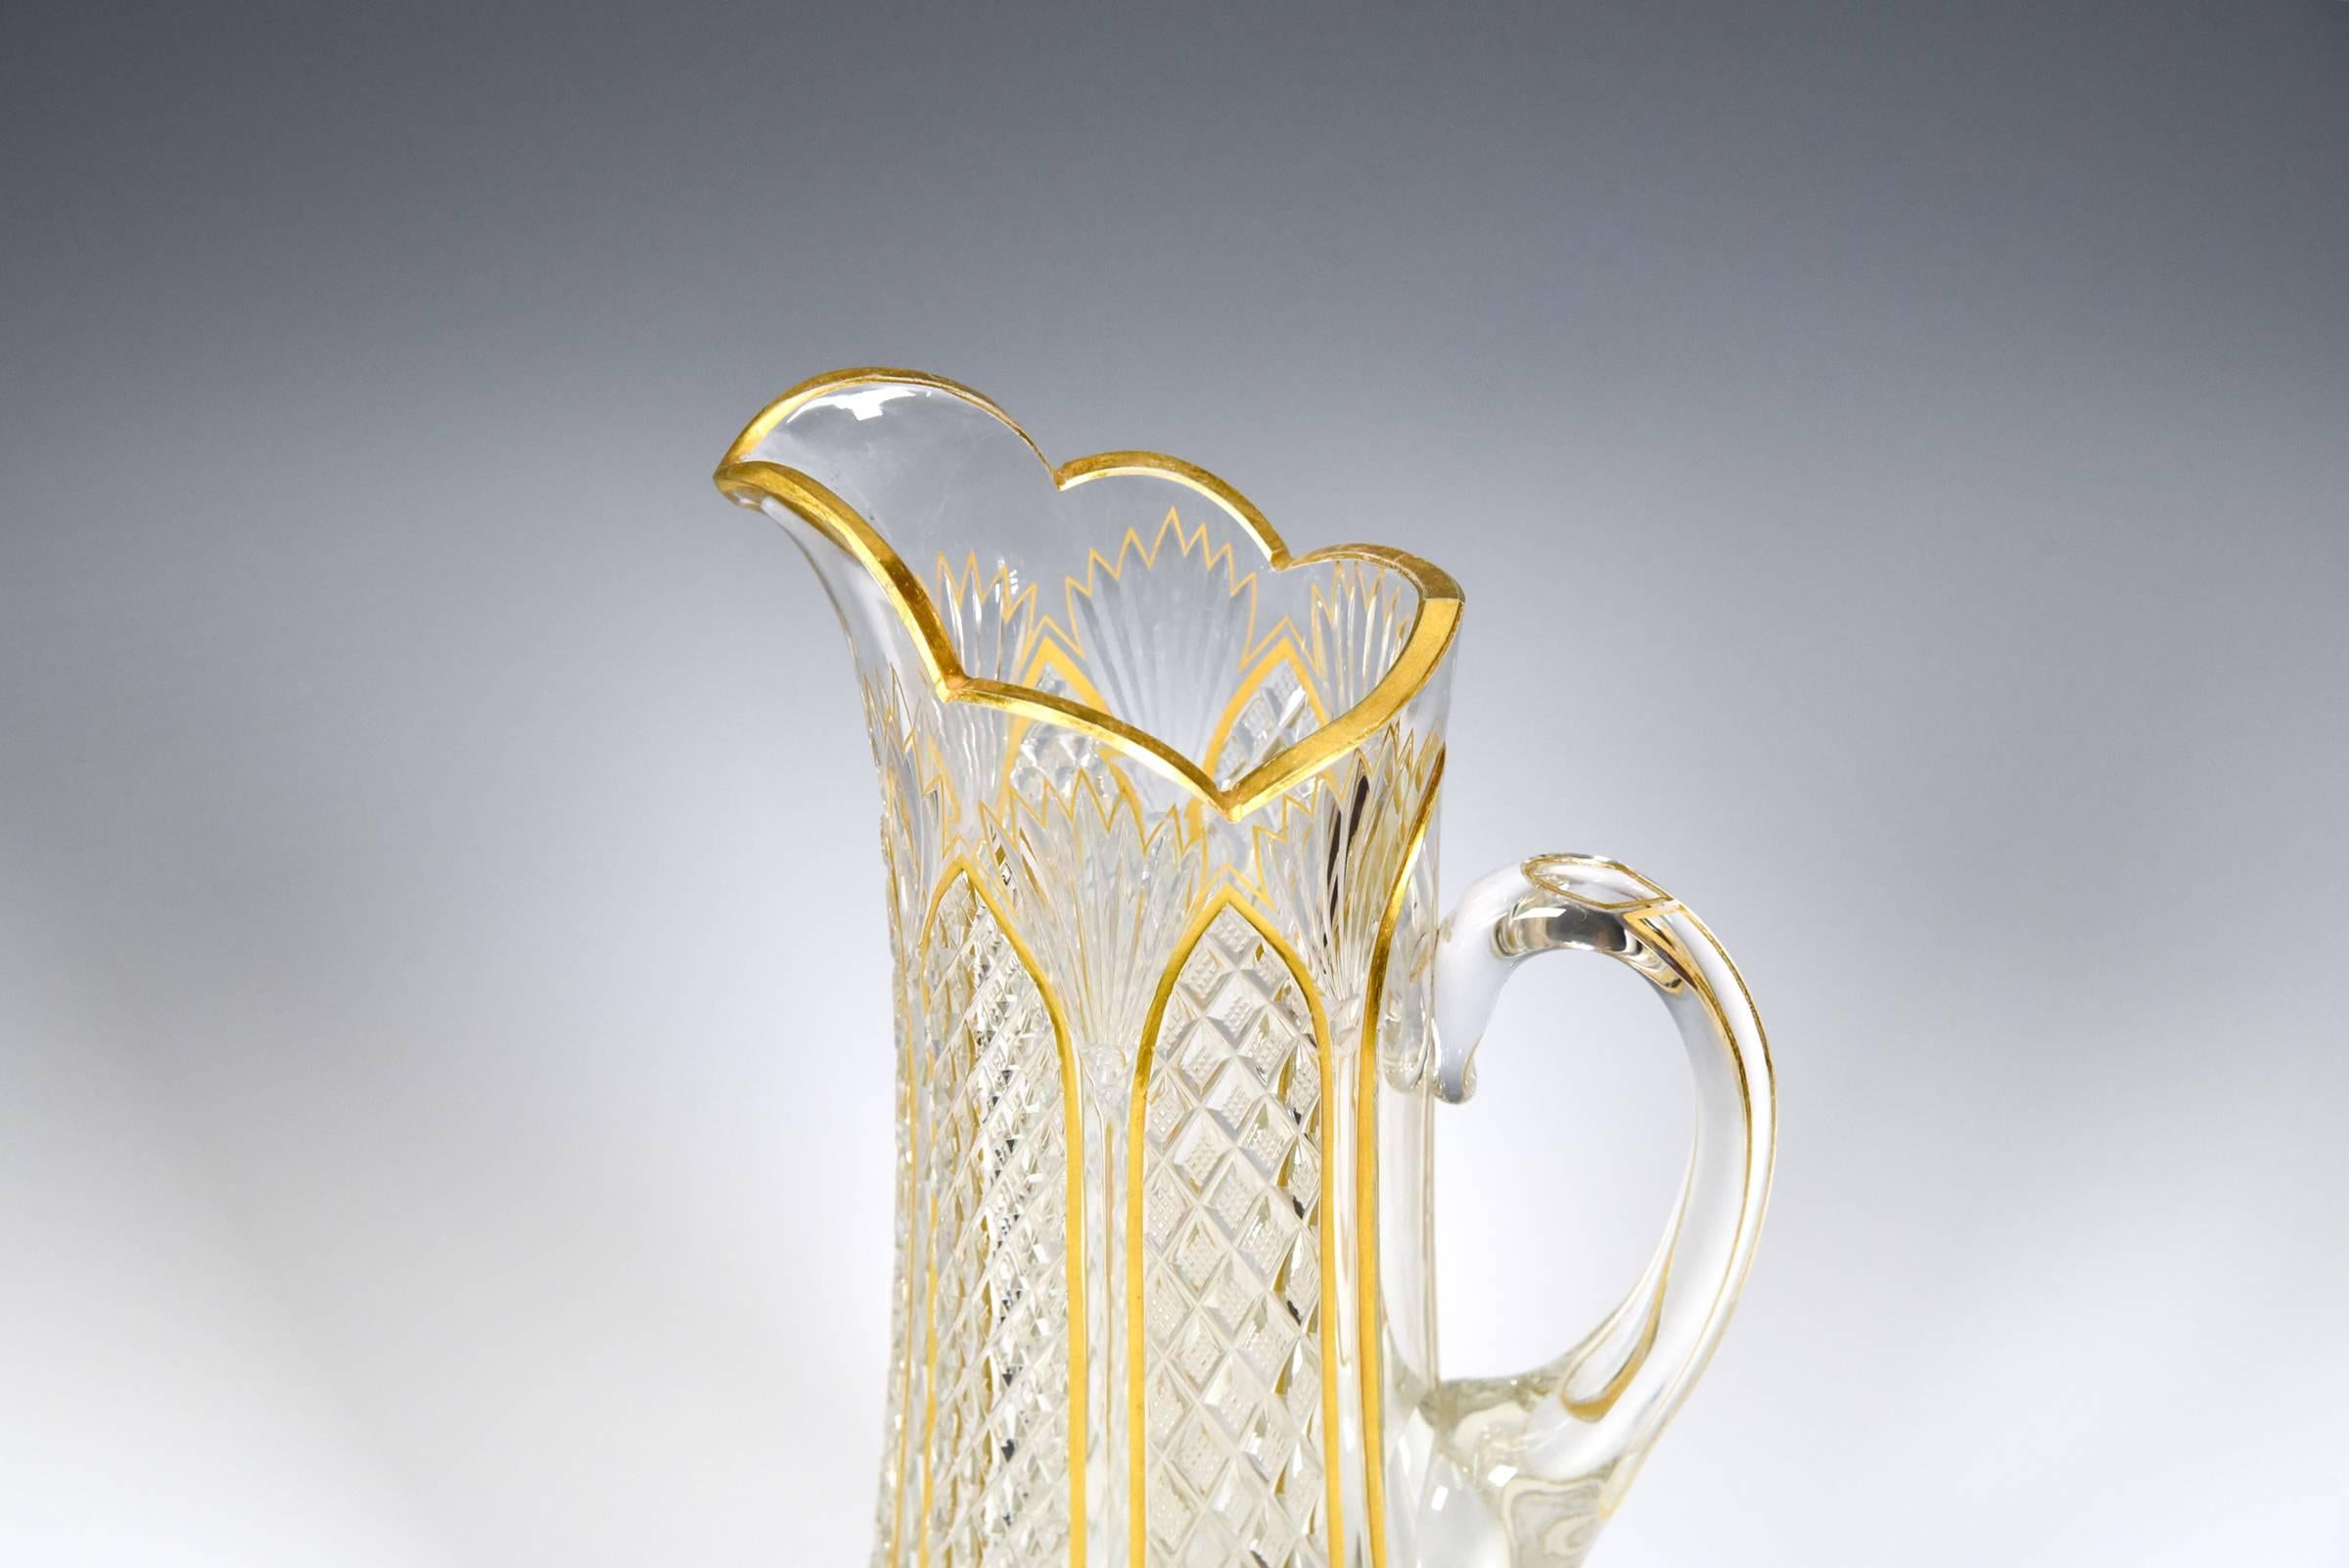 French Handblown 19th Century Cut Crystal Pitcher with Gold Enamel Decoration Baccarat